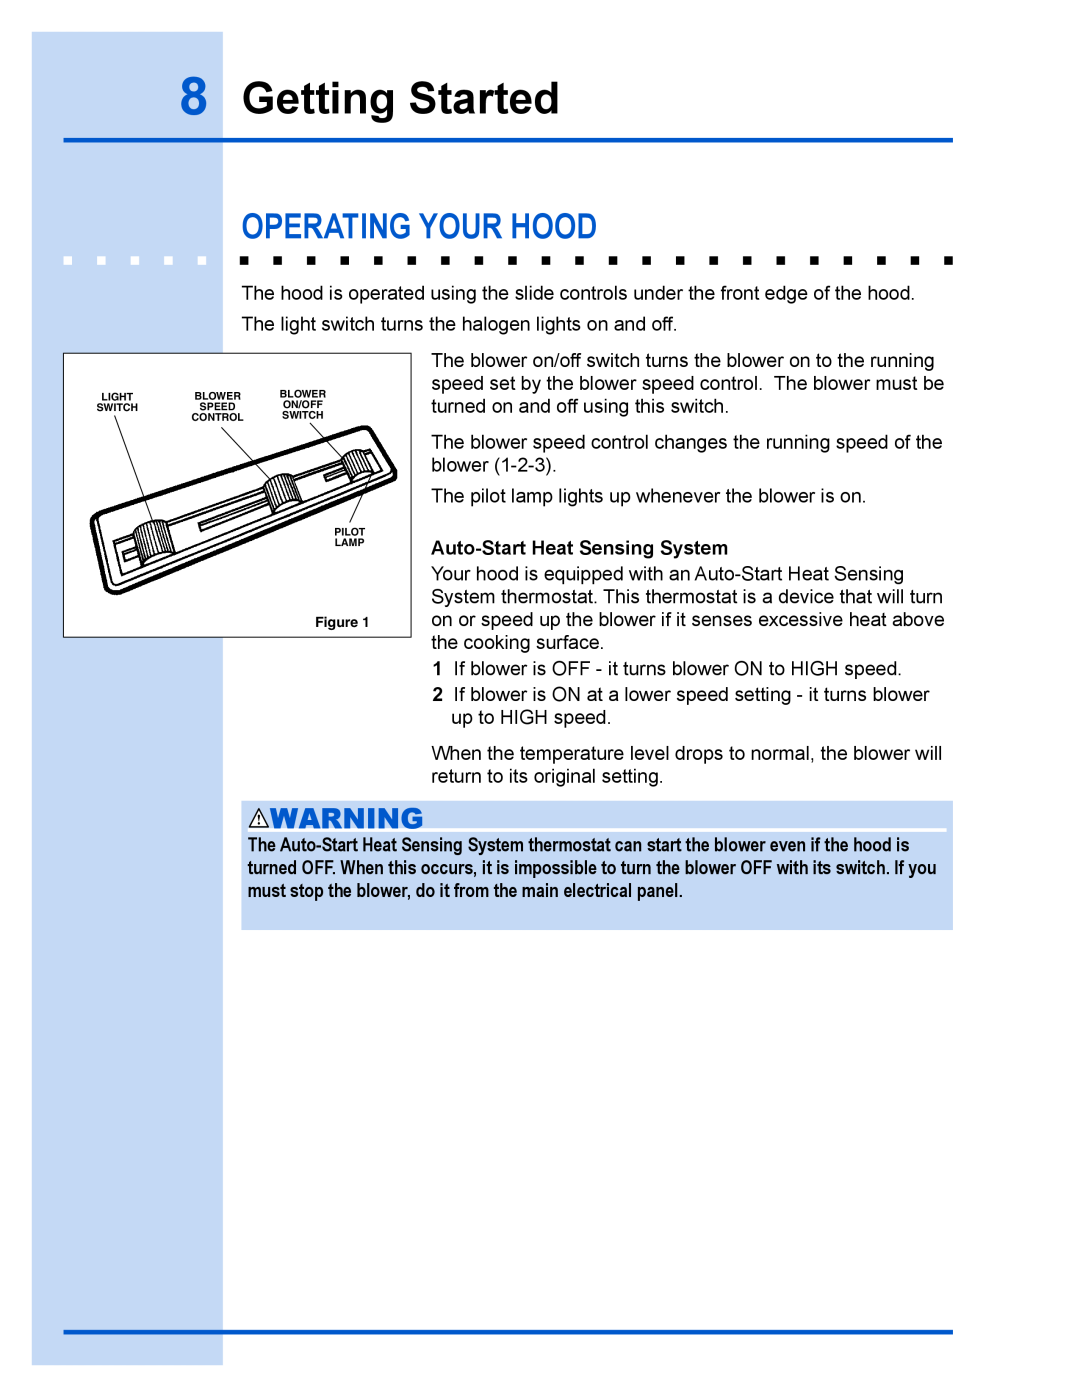 Electrolux E40PV100FS installation instructions Getting Started, Operating Your Hood 